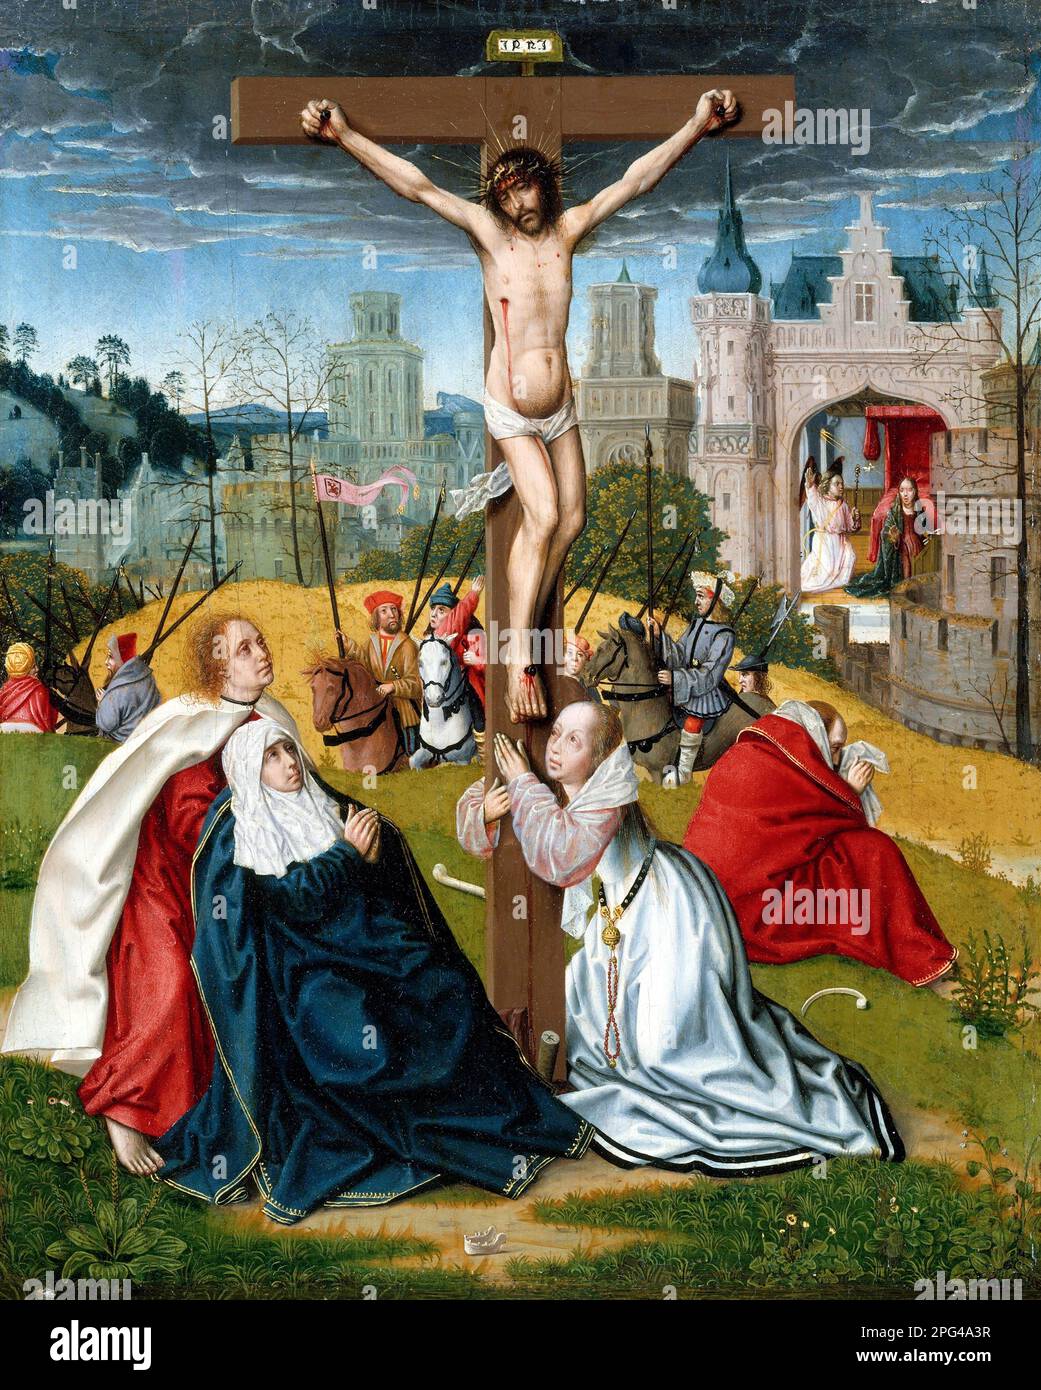 The Crucifixion by Jan Provoost (1462-1529), oil on wood, c. 1495 Stock Photo